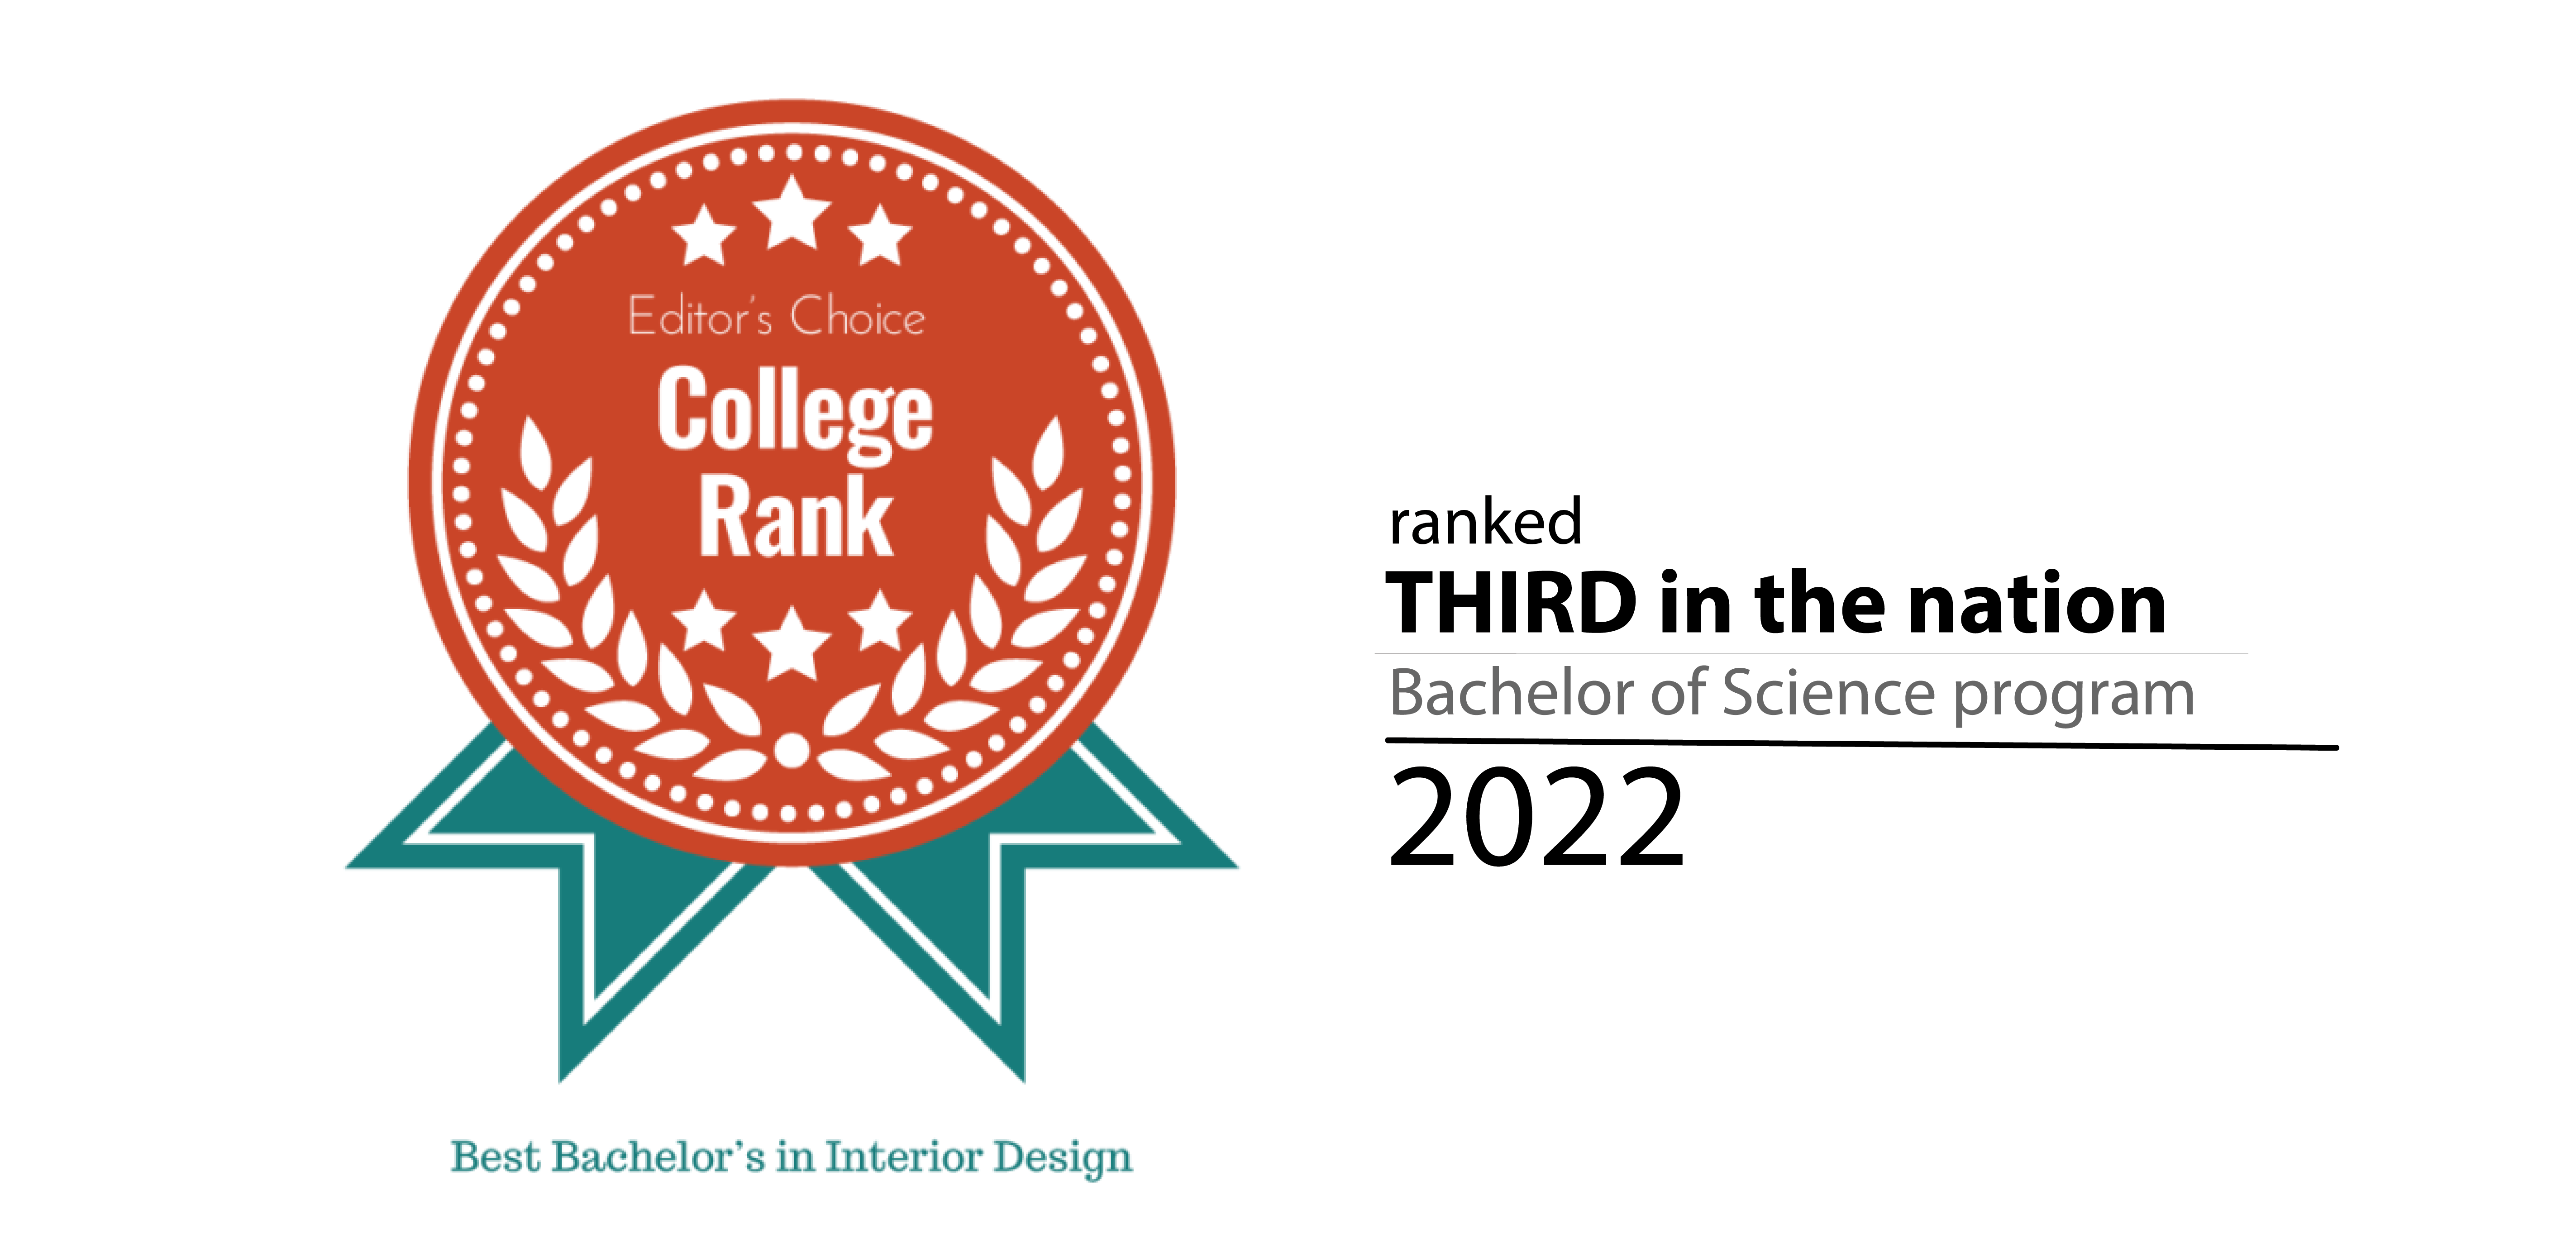 Editor's Choice College Rank Best bachelors in Interior Design, Ranked third in the nation Bachelor of science program 2022